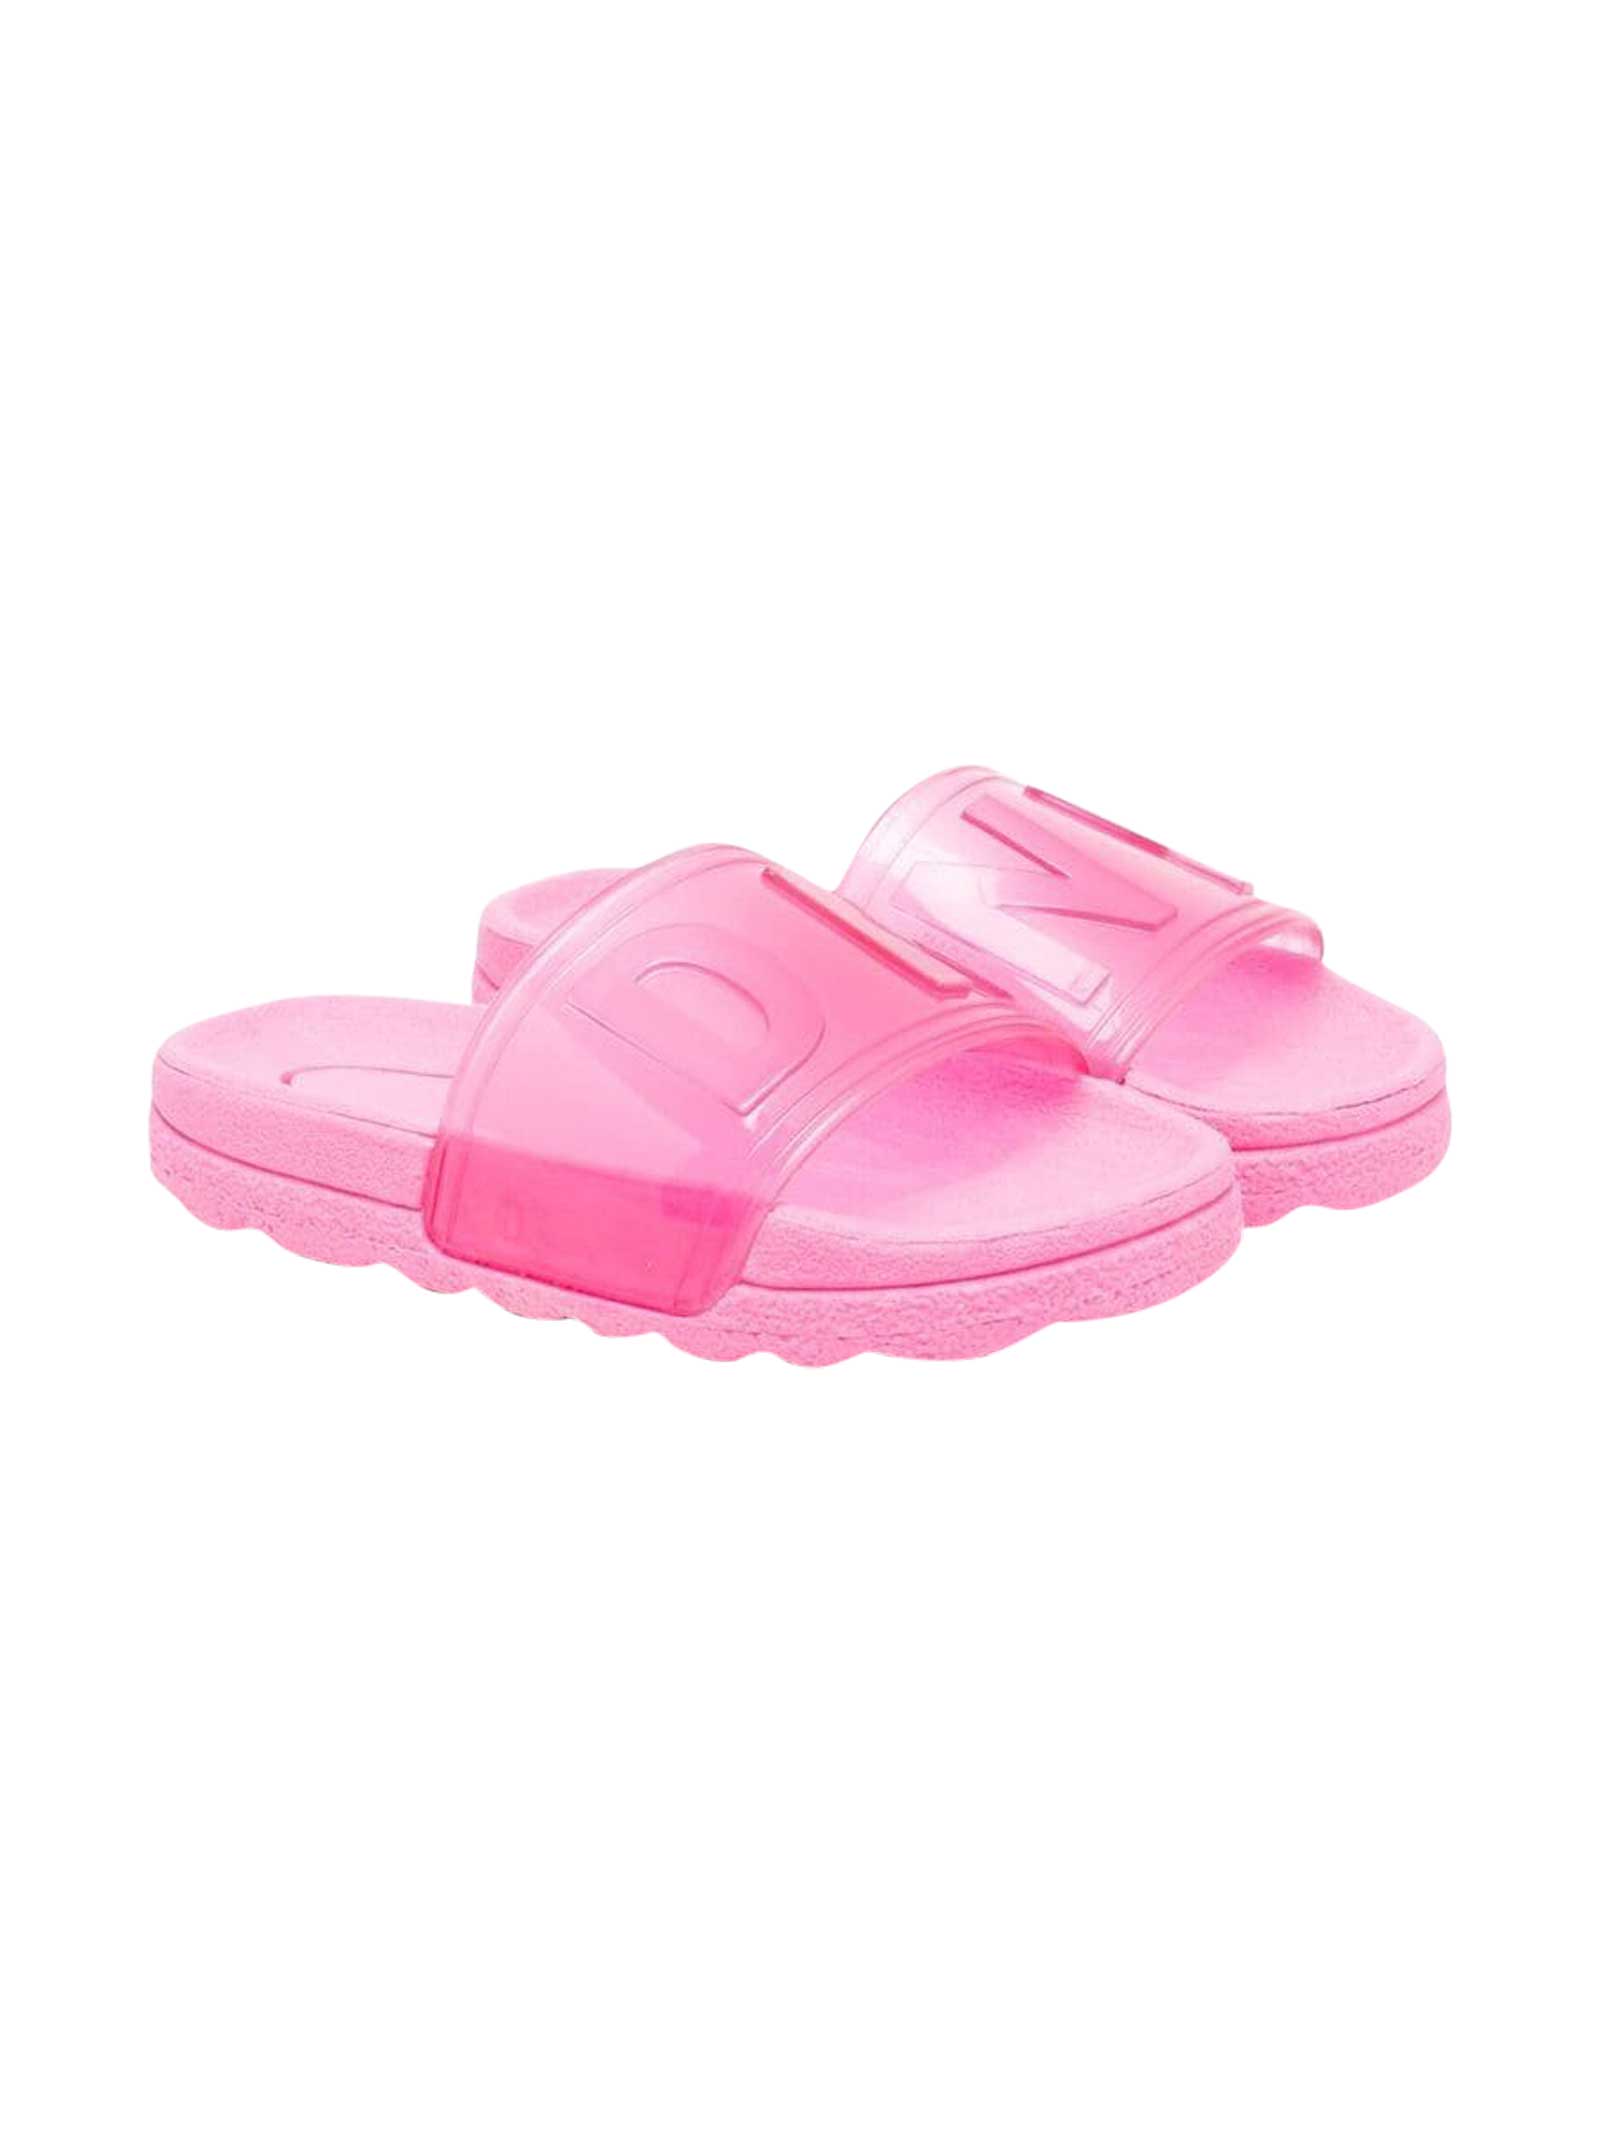 DKNY Pink Slippers